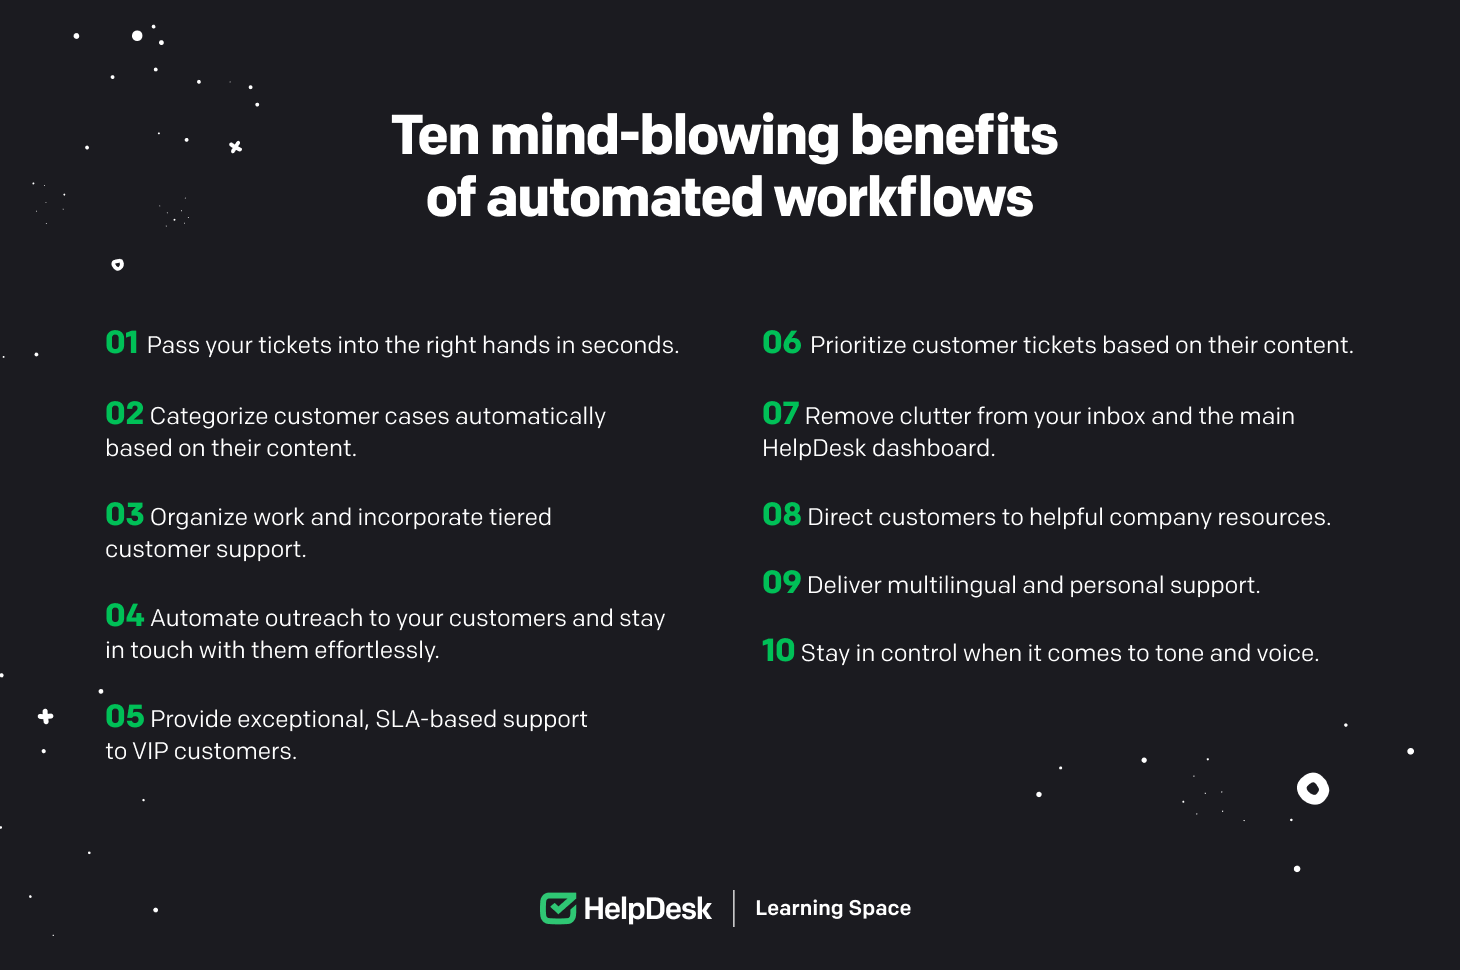 Ten mind-blowing benefits of automated workflows.